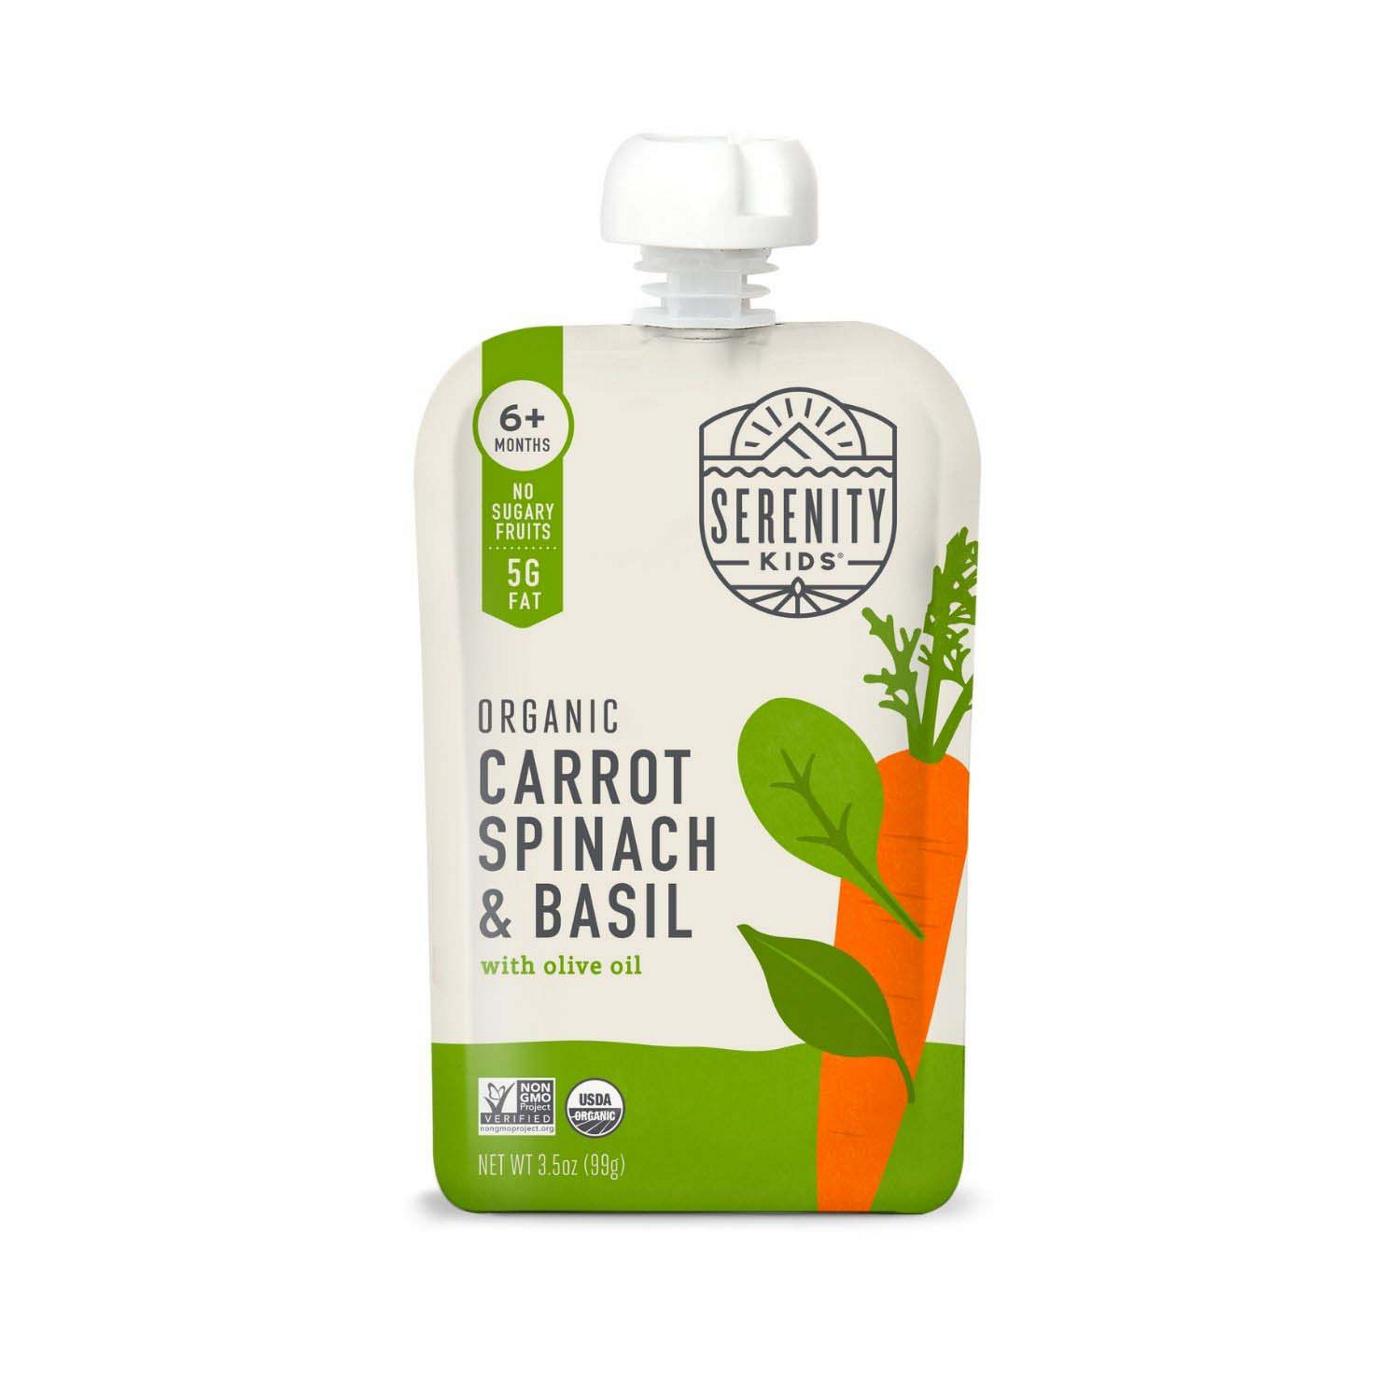 Serenity Kids Organic Carrot, Spinach & Basil Baby Food Pouch; image 1 of 5